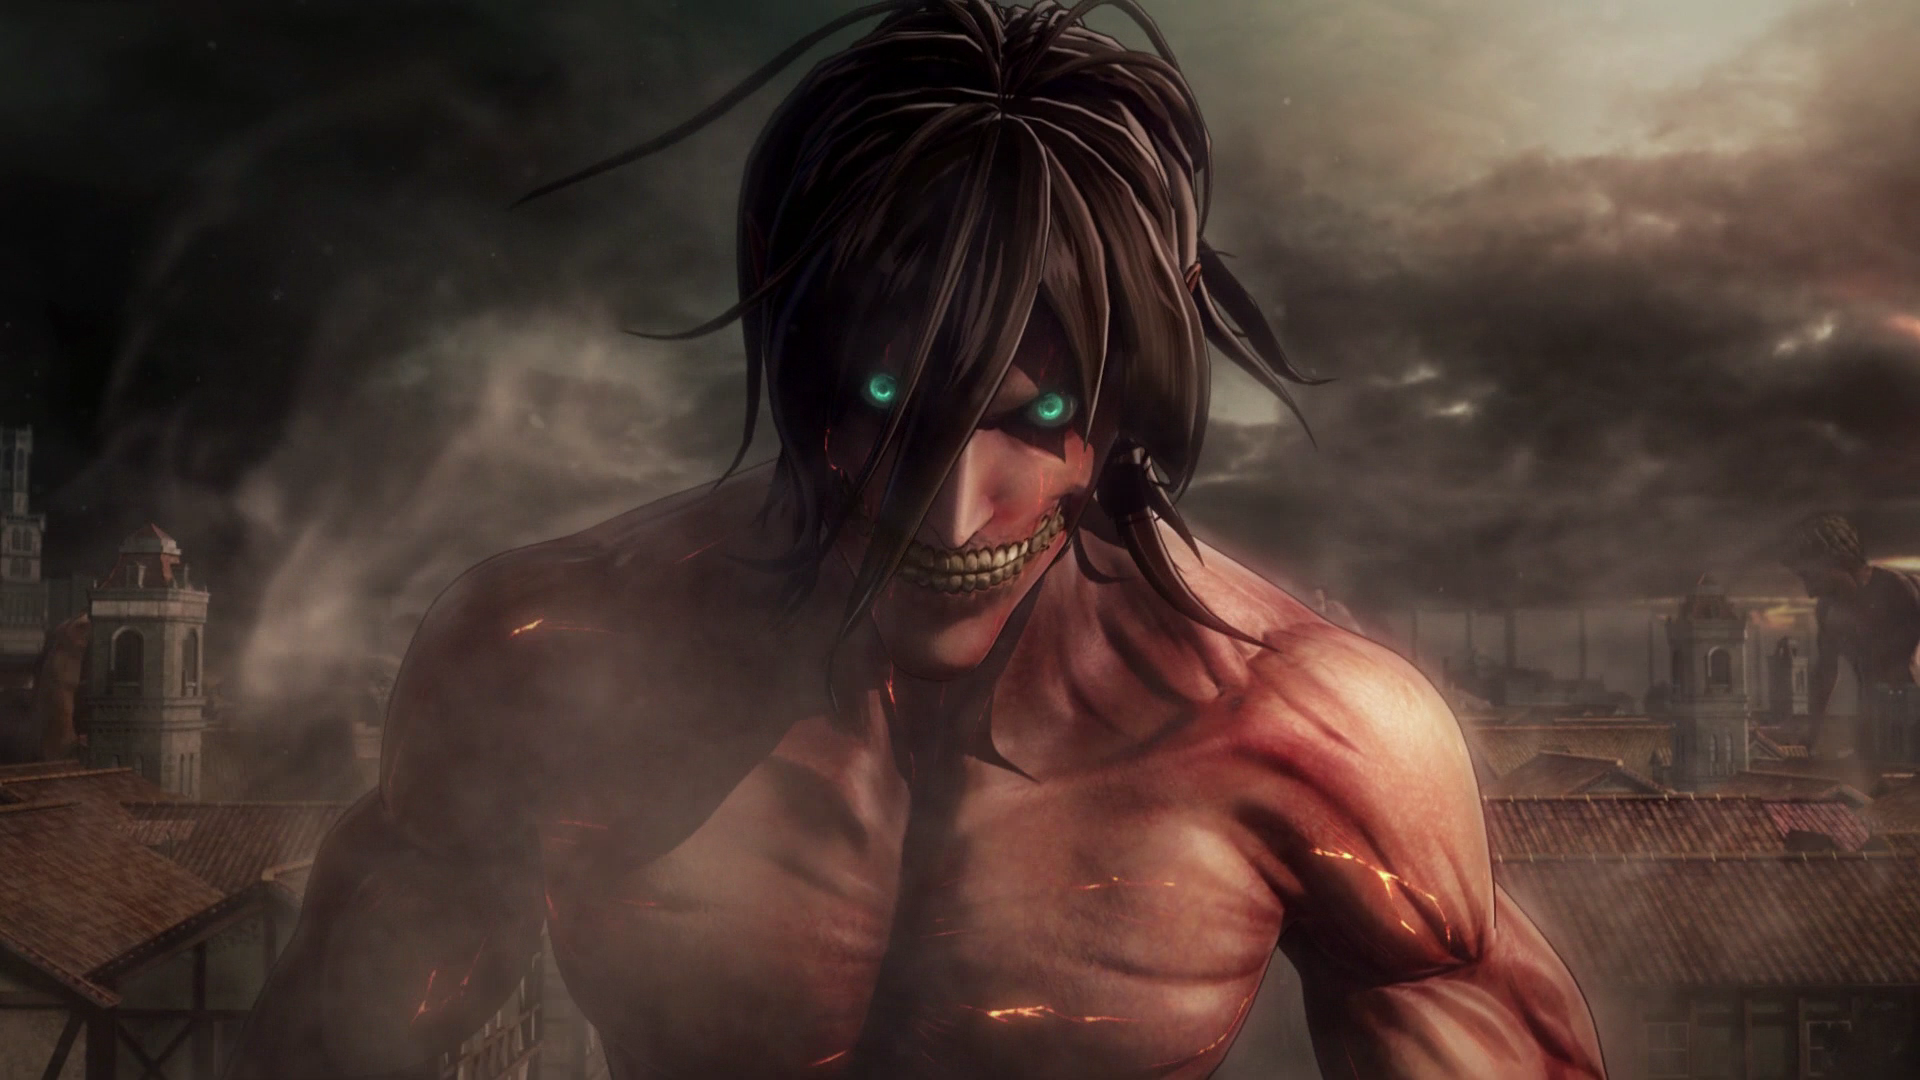 Check Out The First Hour of The PS4 Attack on Titan's Story Mode